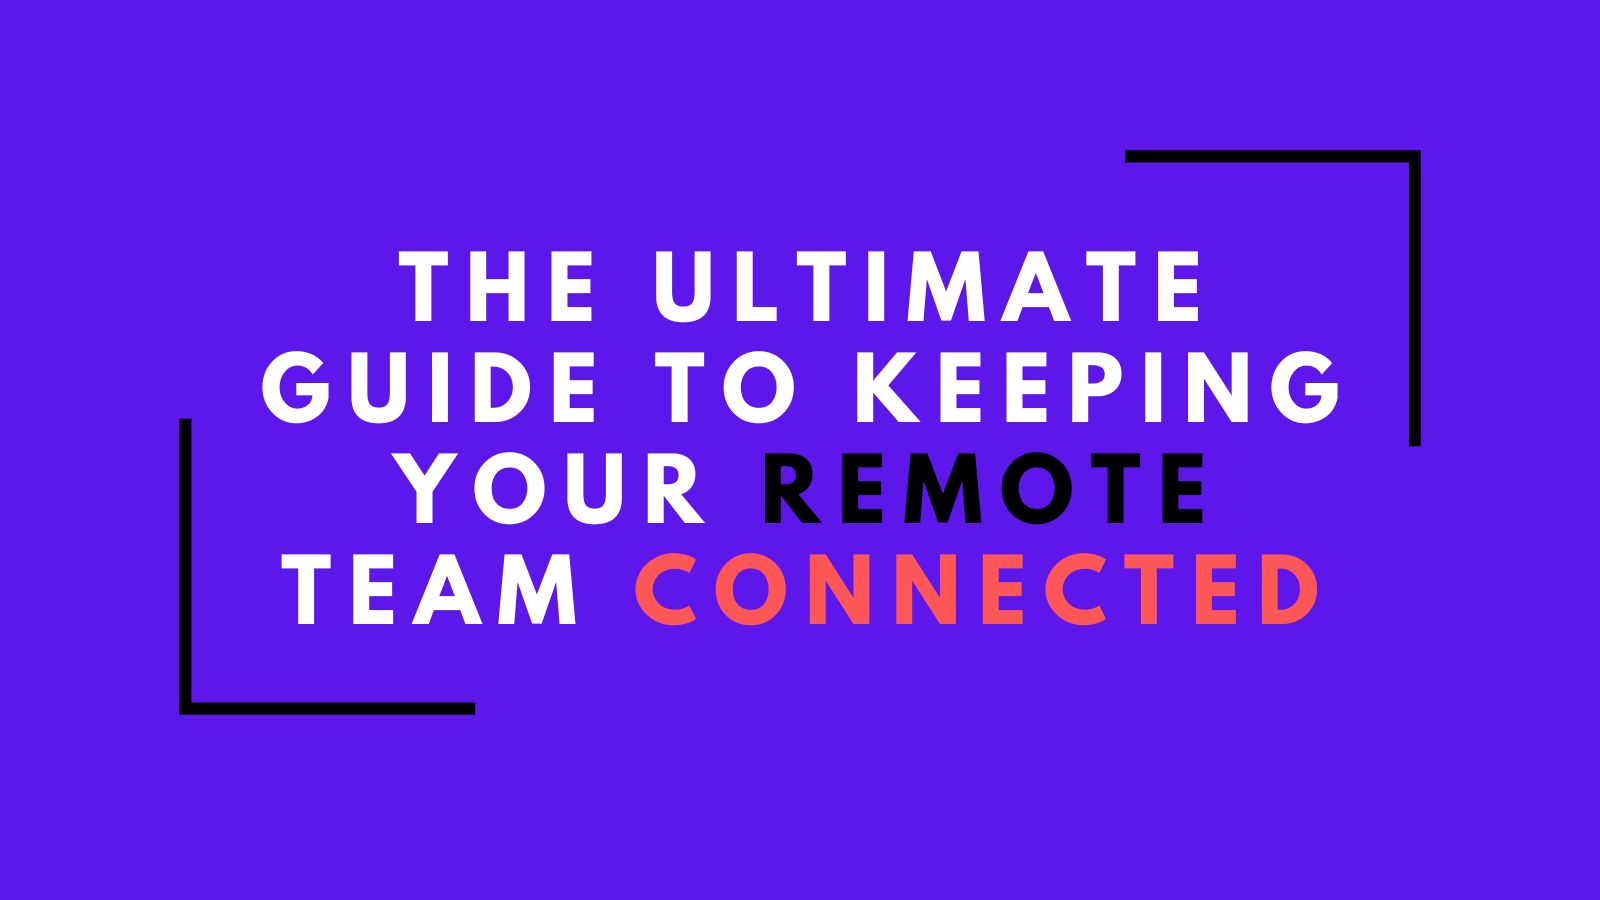 The Ultimate Guide to Keeping Your Remote Team Connected